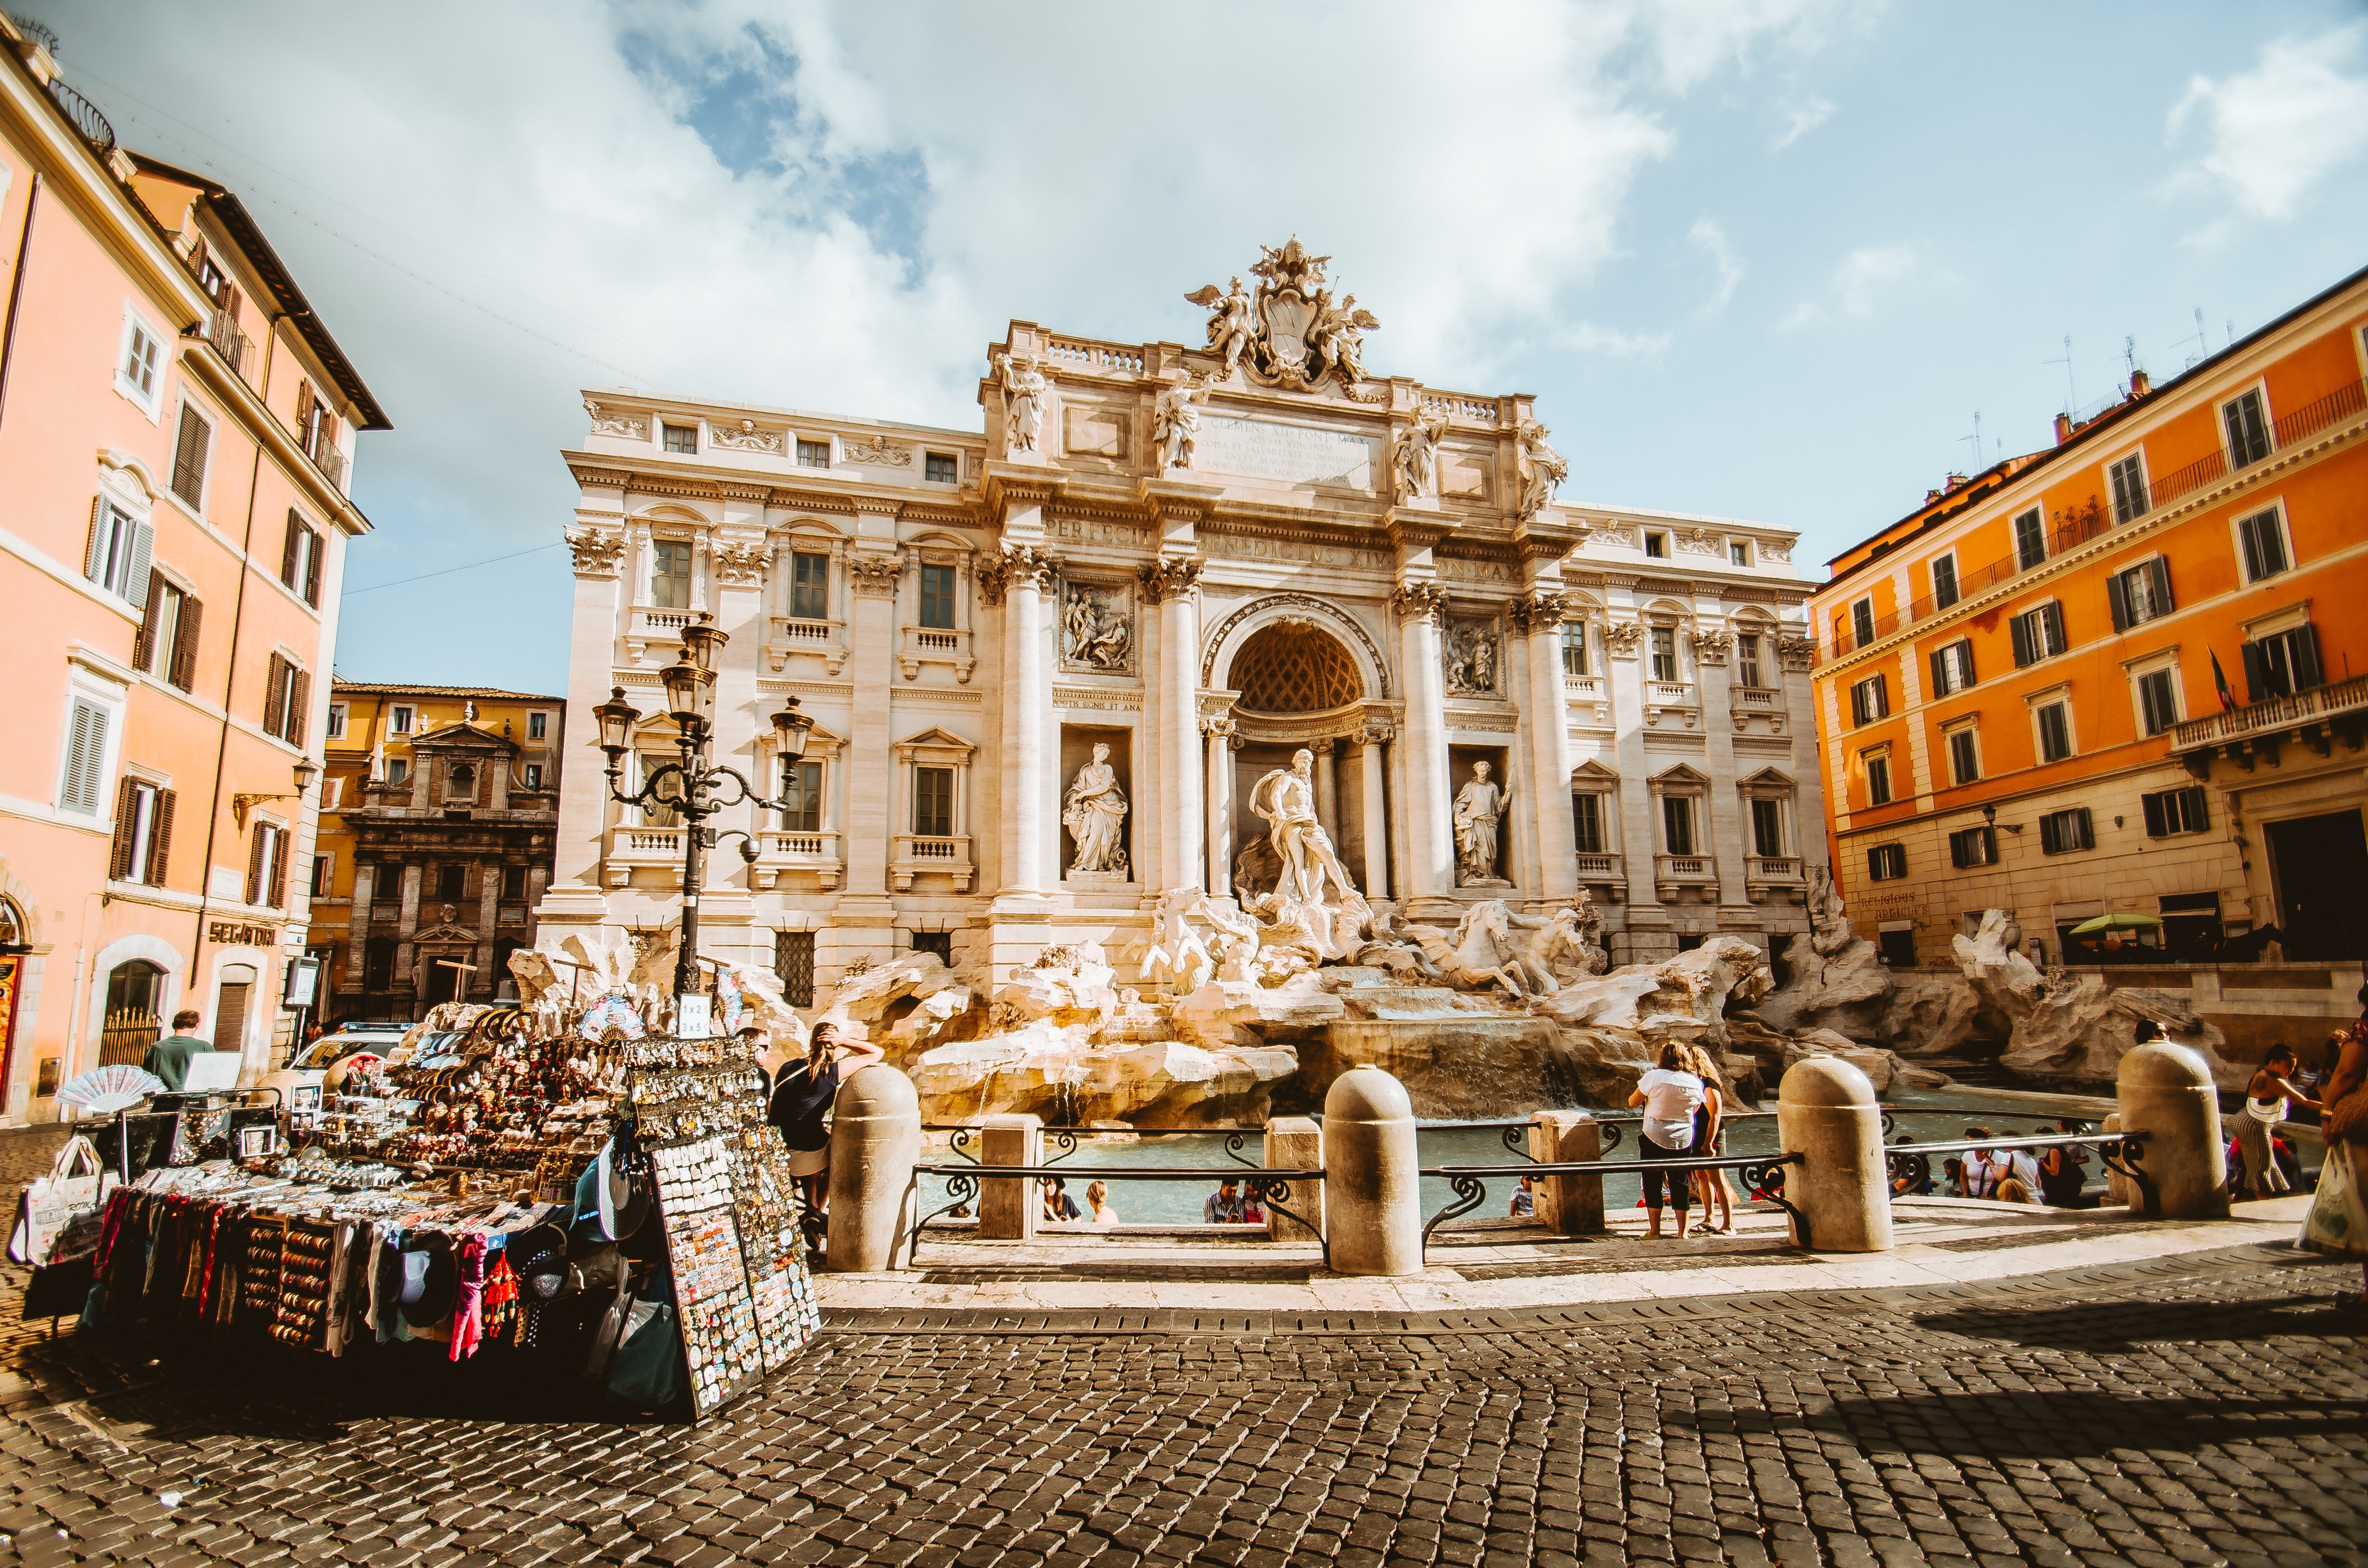 Rome In 3 Days - Explore Rome In 3 Days With This Ultimate 3 Day Itinerary